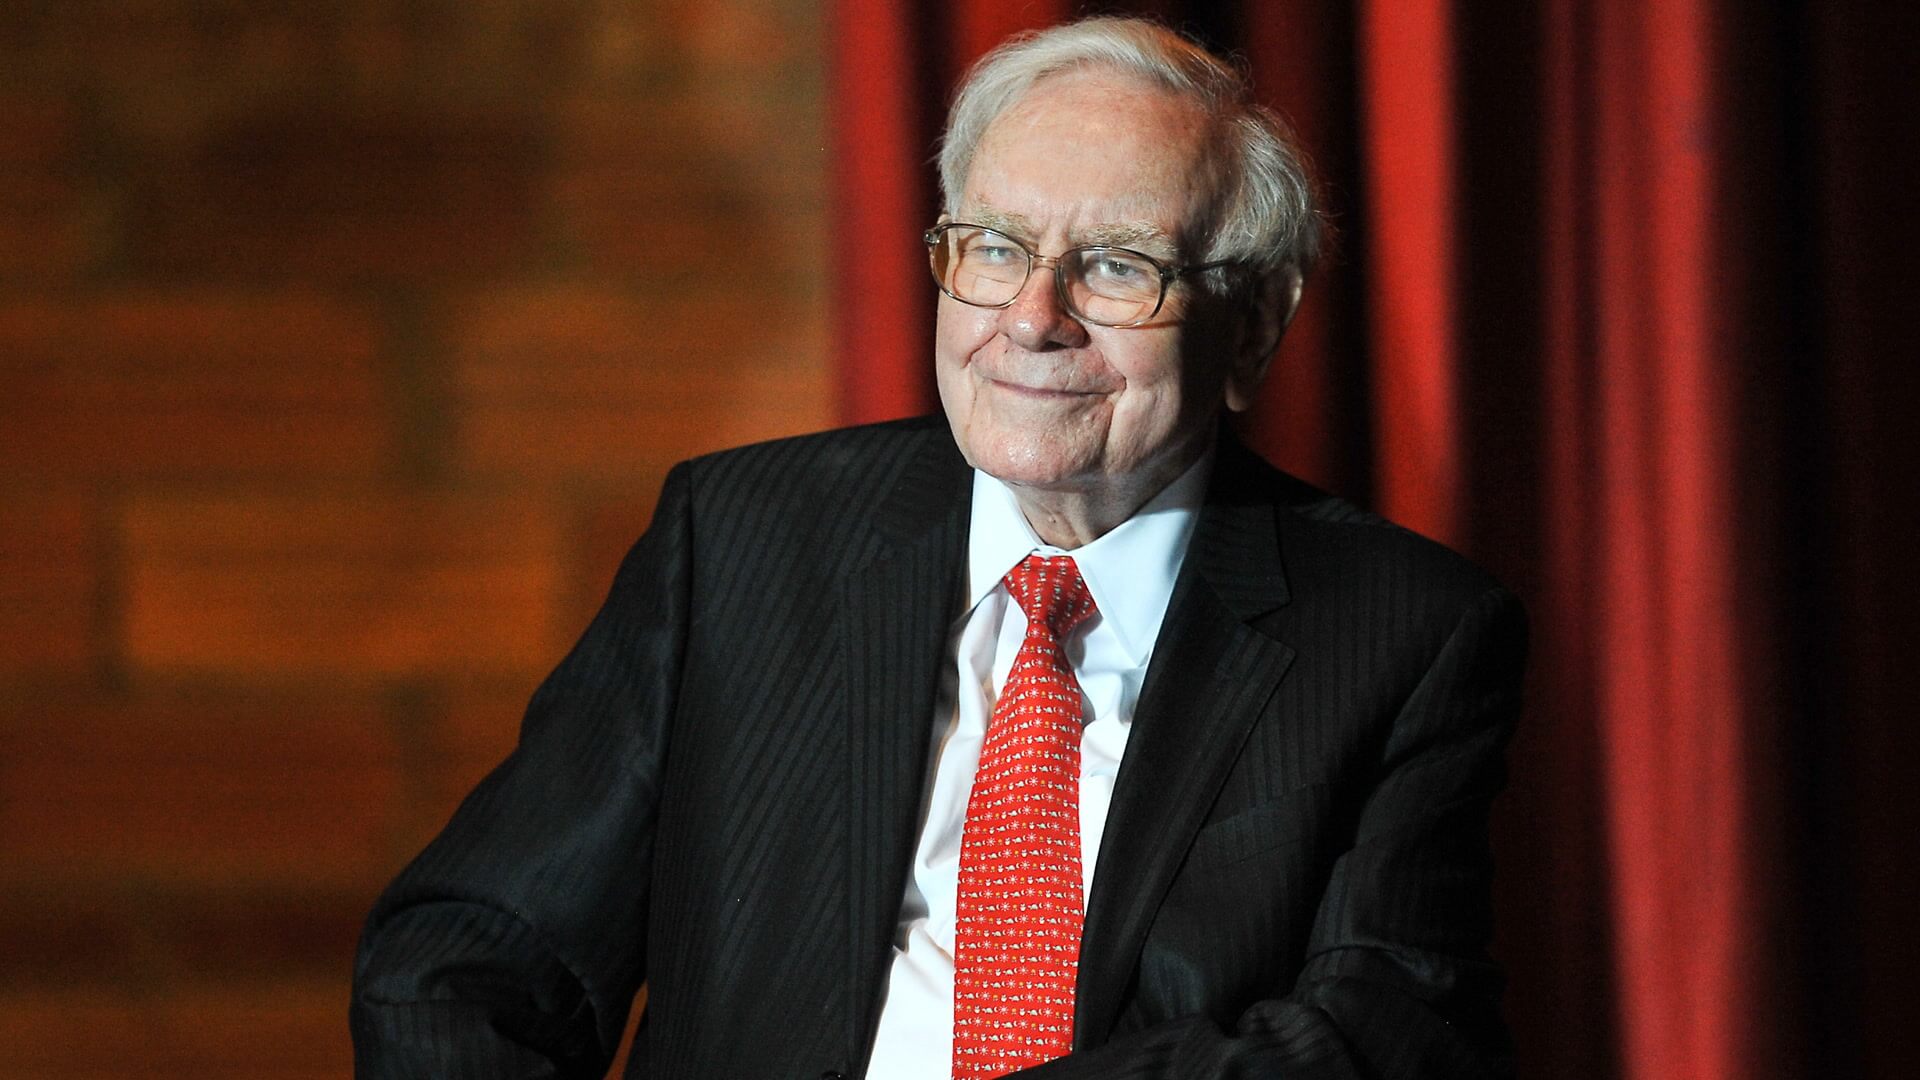 Top 10 Richest People in Finance